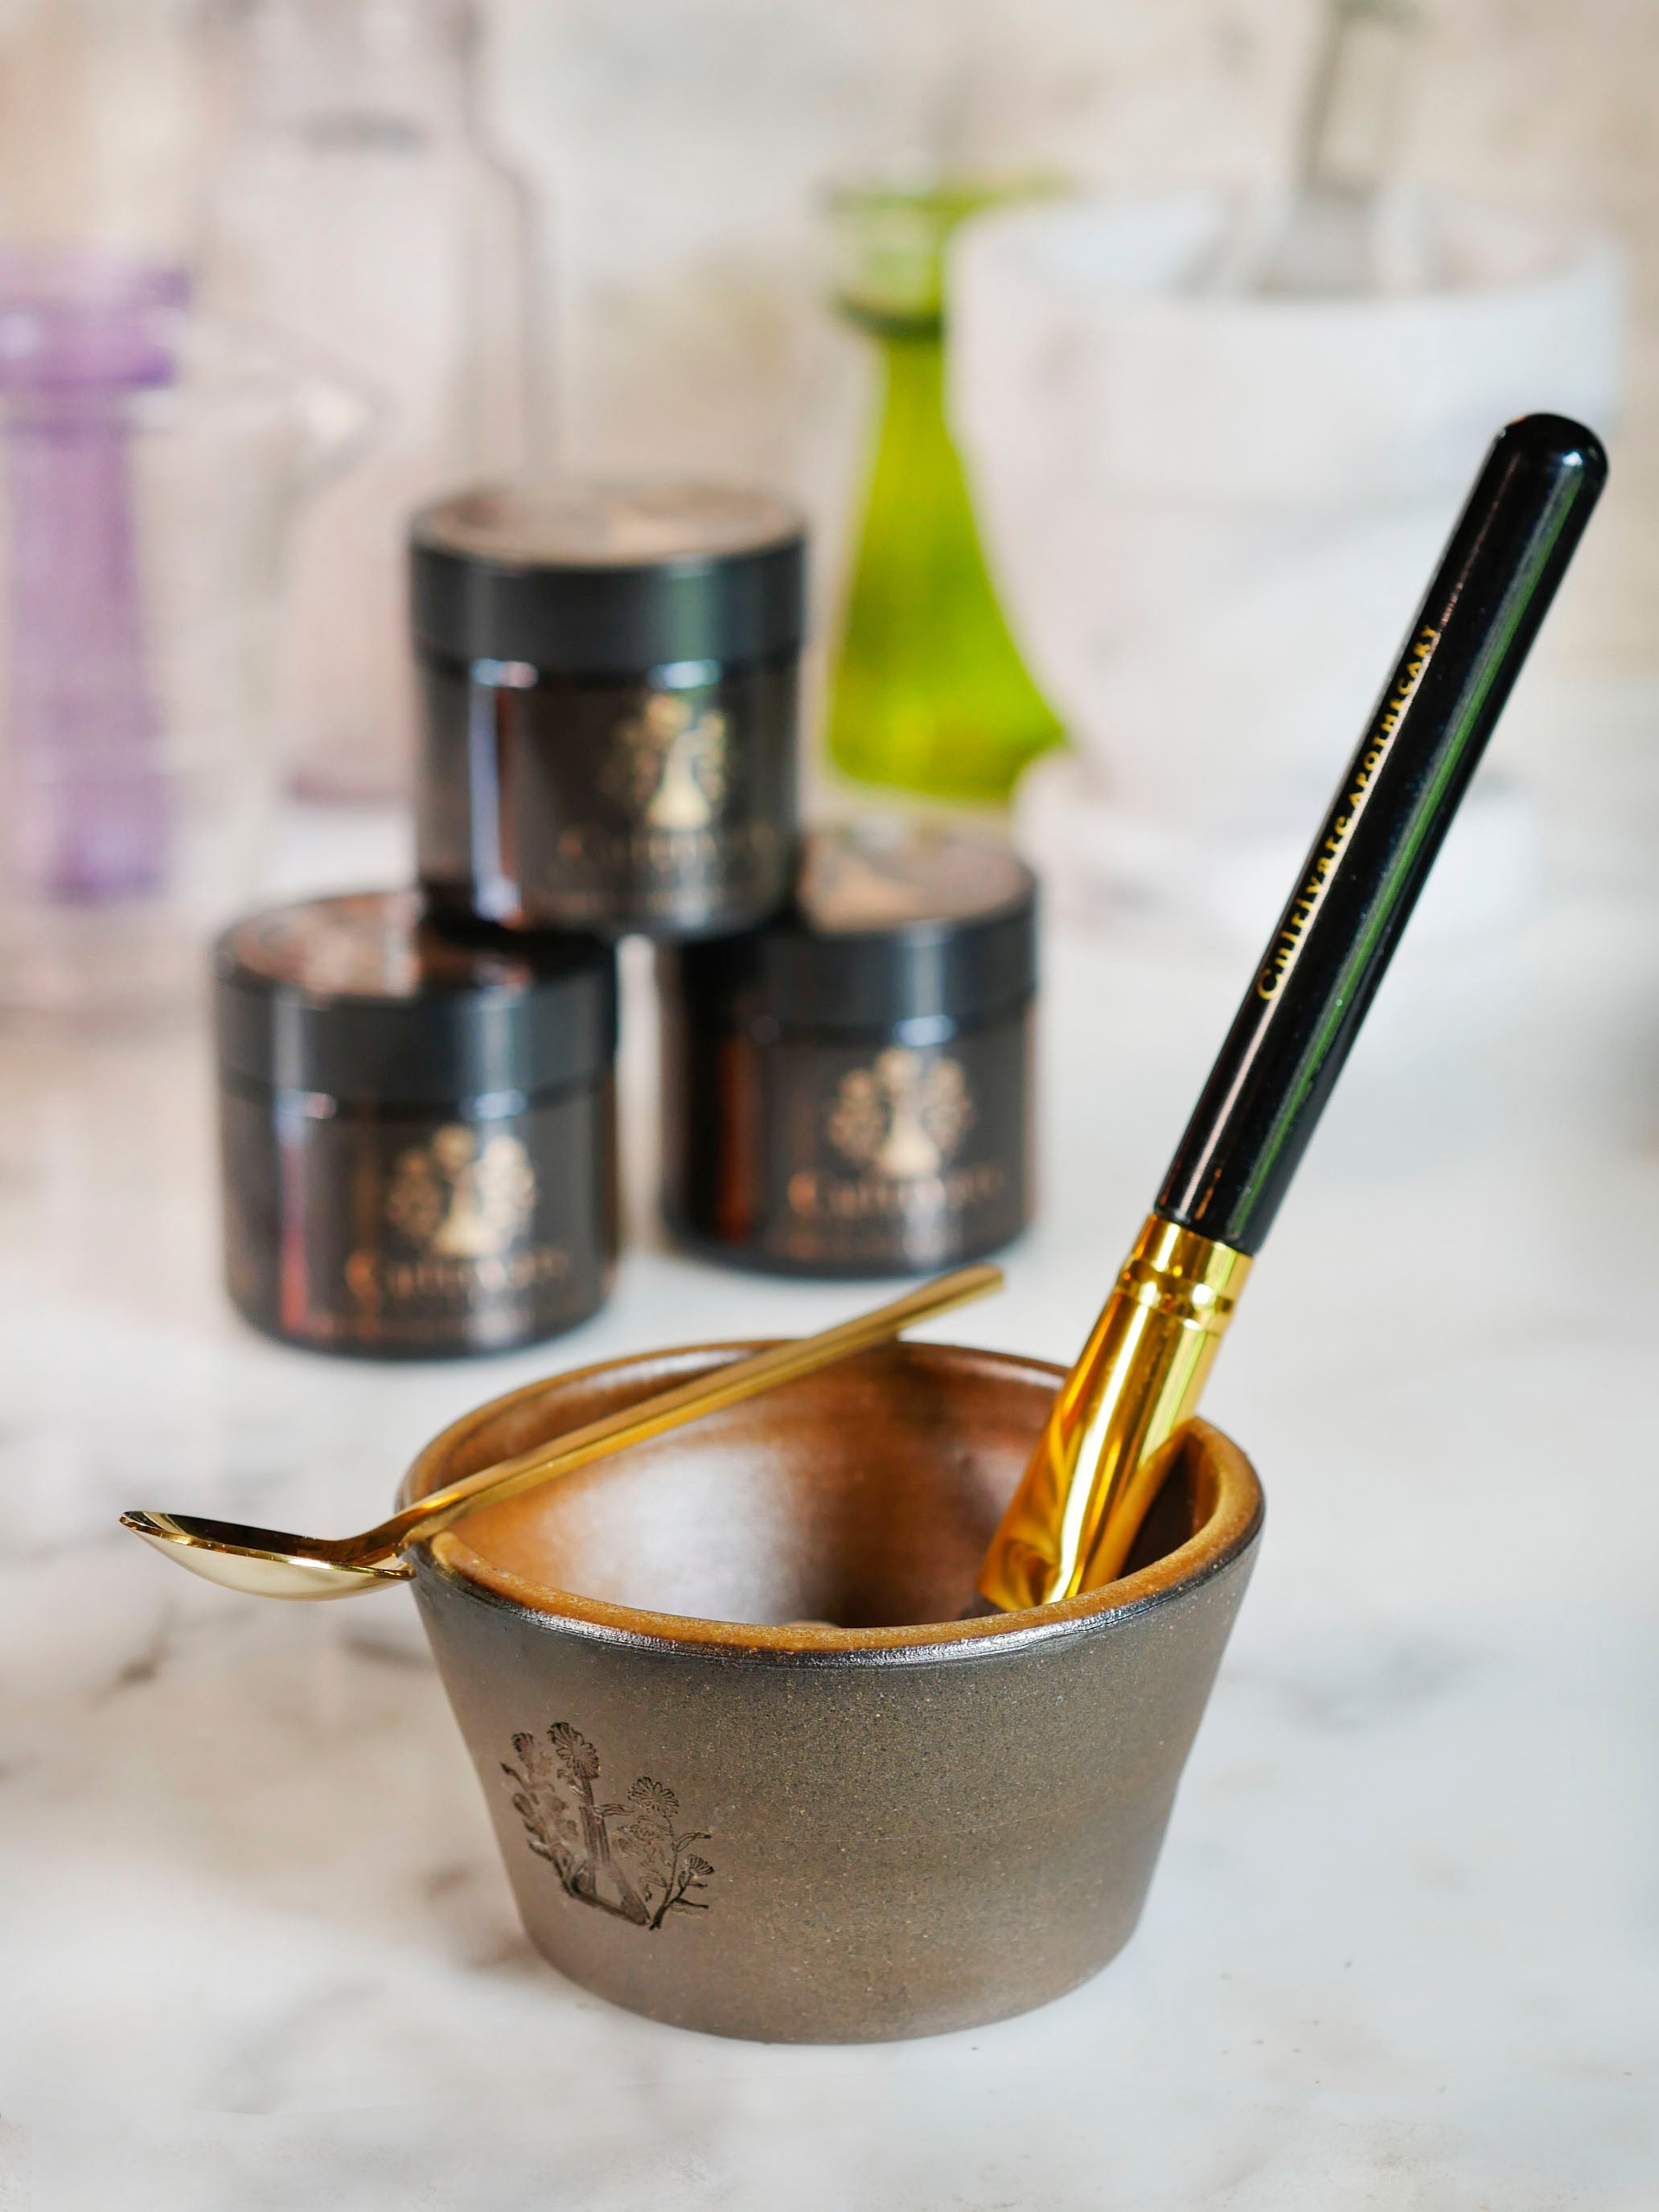 Face mask bowl set including a face mask bowl, face mask brush, and gold face mask mixing spoon.